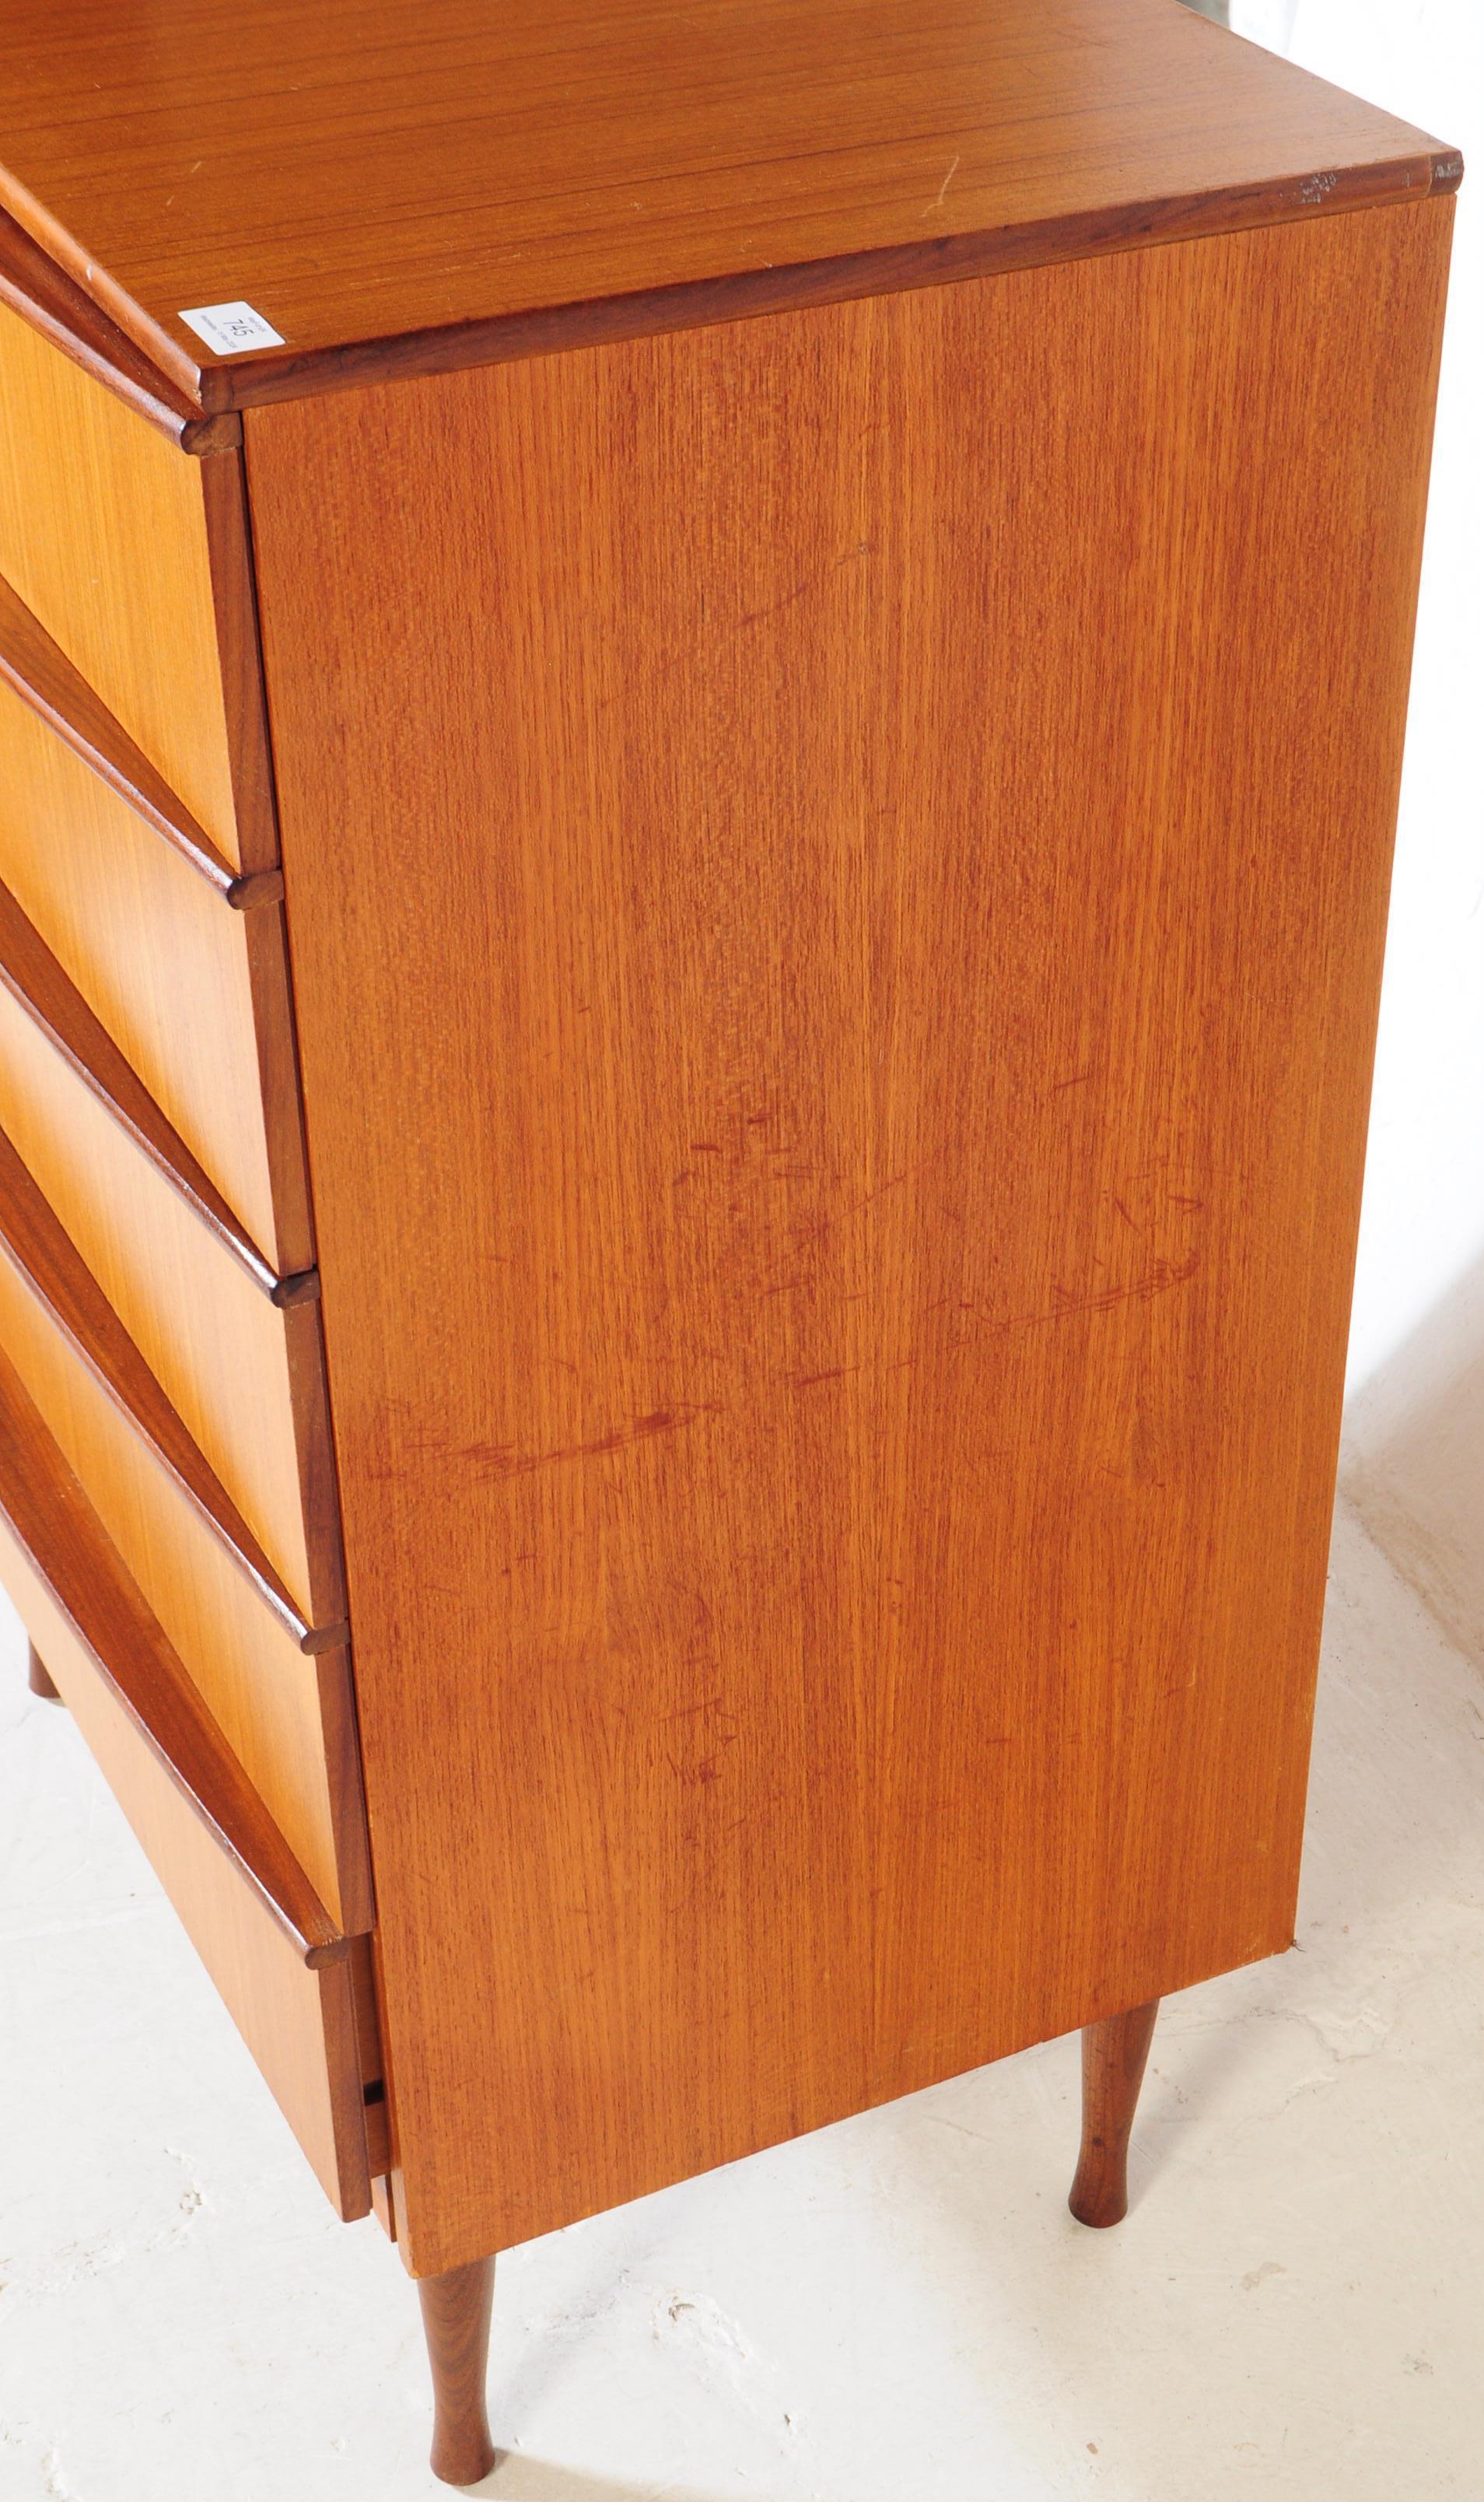 AVALON - MID CENTURY CHEST OF DRAWERS - Image 6 of 7